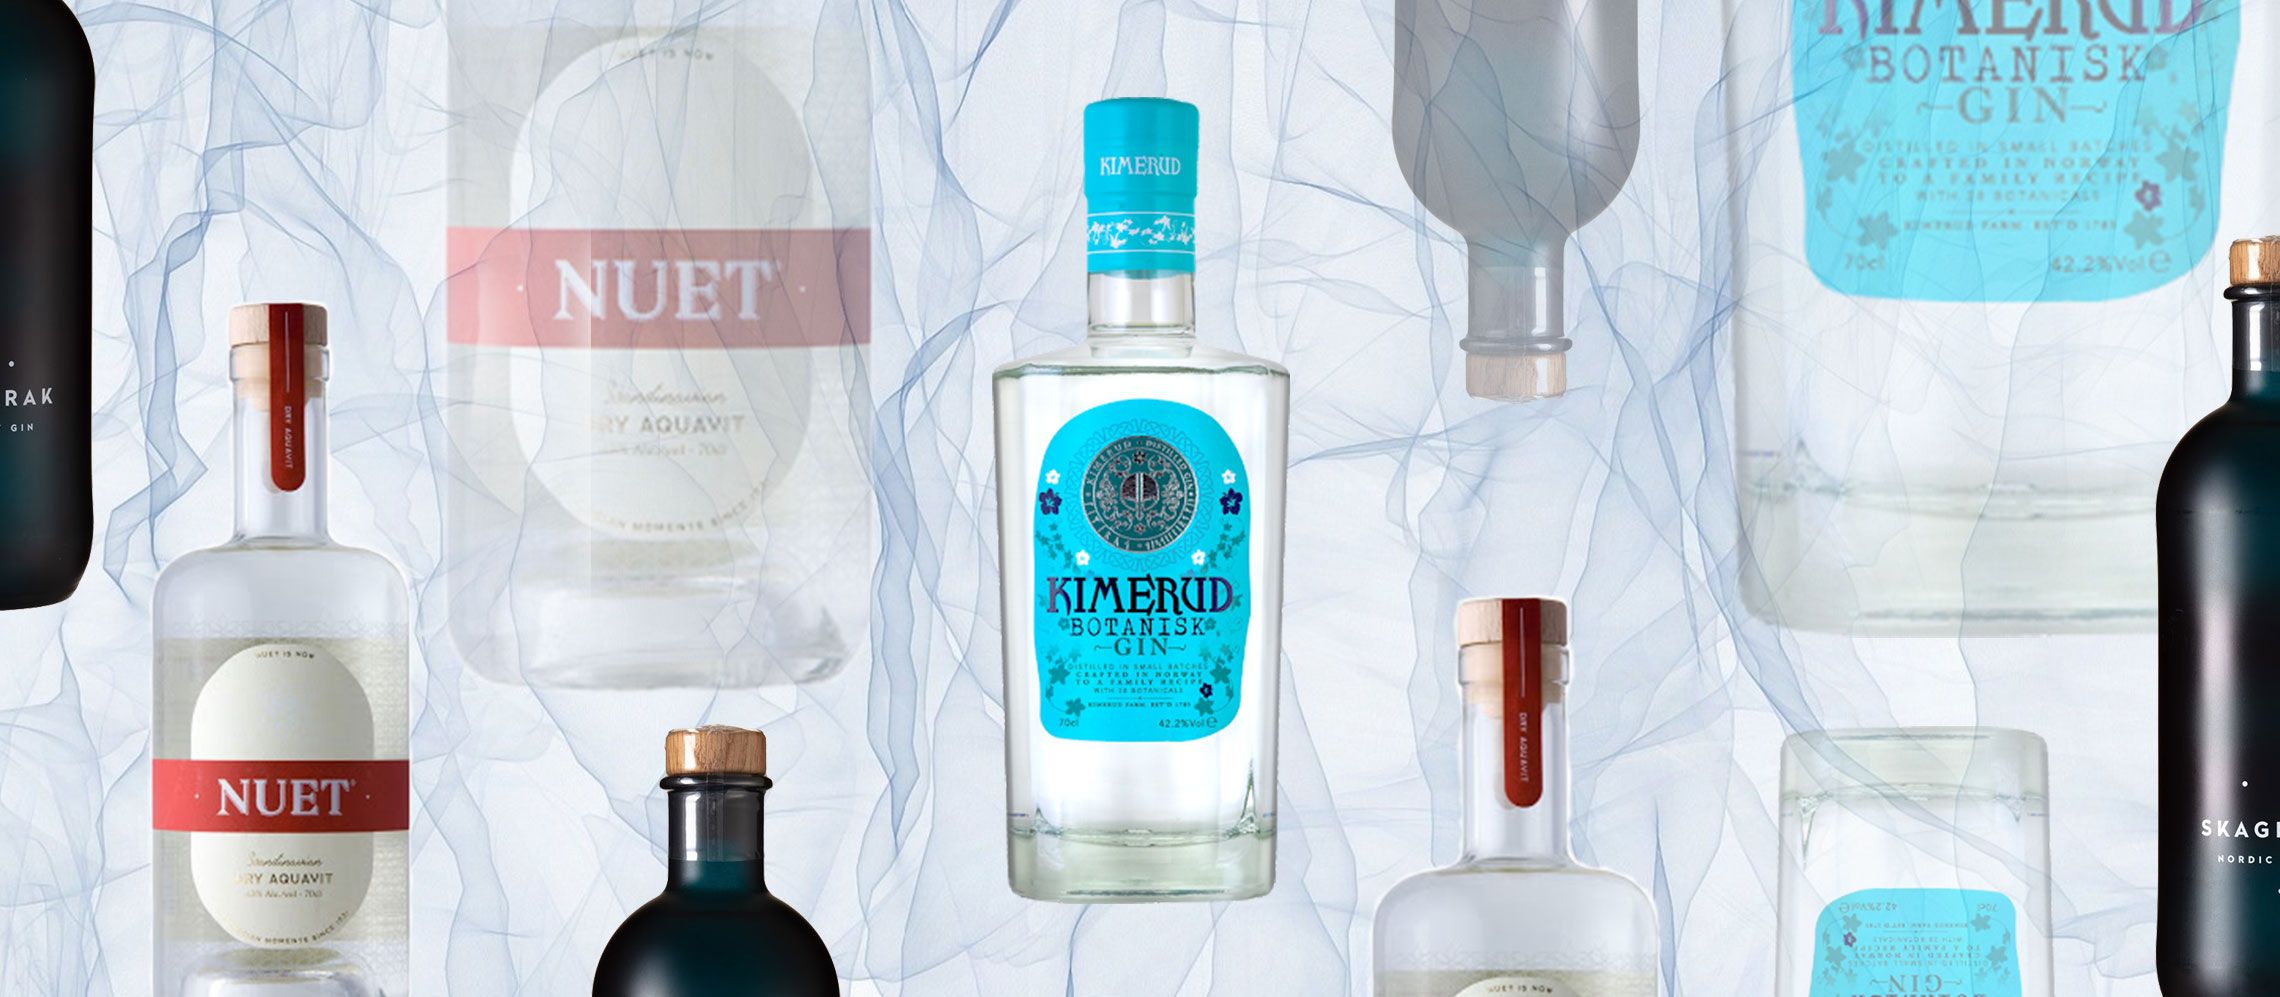 Photo for: Award-Winning Gins To Try From Norway